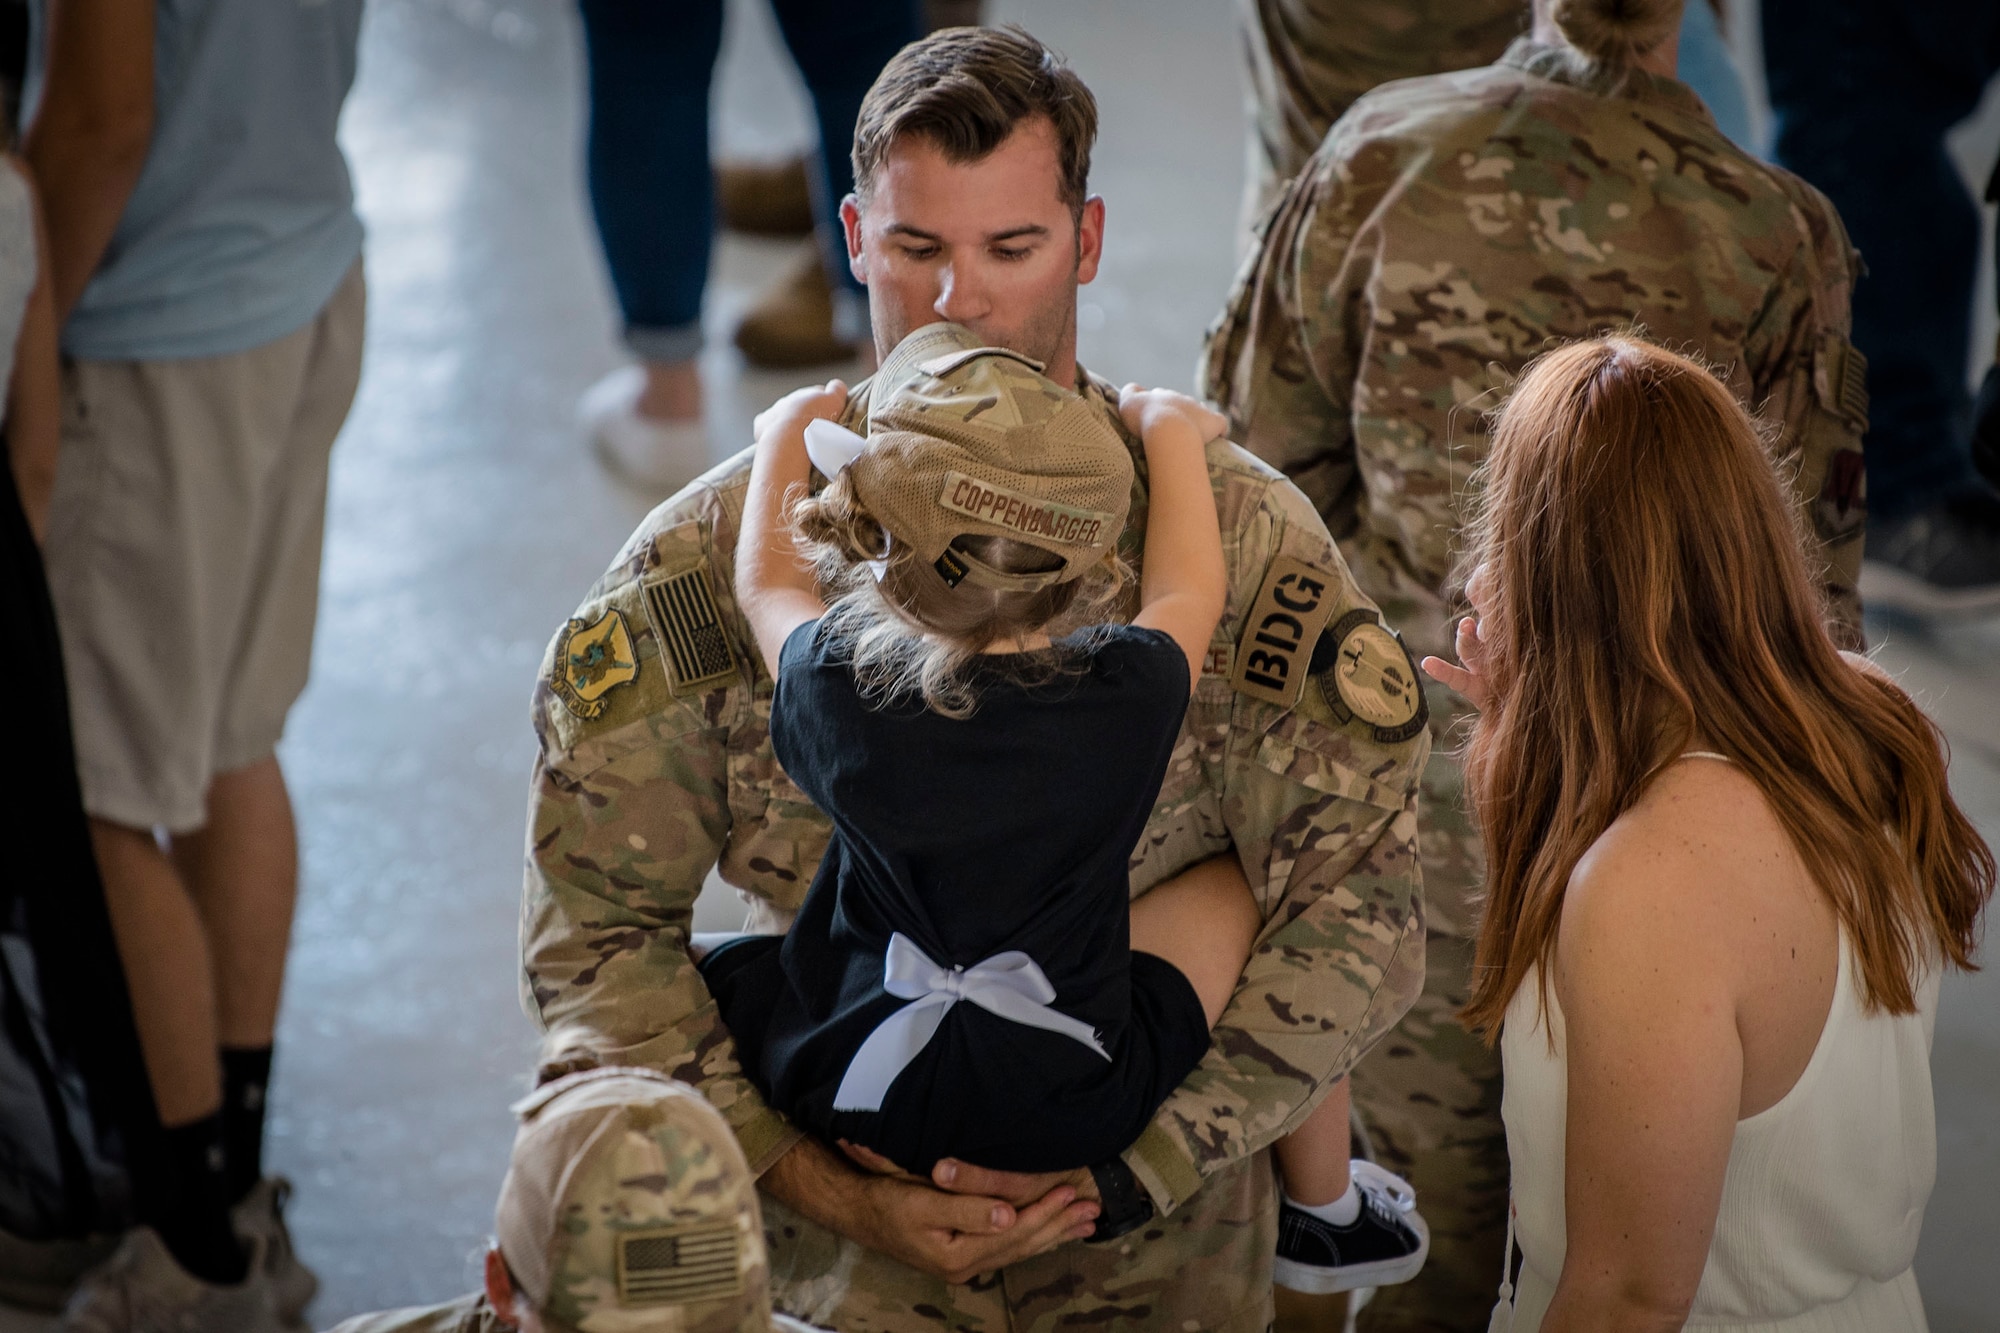 Tech. Sgt. Cliff Coppenbarger, 823d Base Defense Squadron (BDS) squad leader, holds his daughter during a redeployment ceremony, Oct. 26, 2018, at Moody Air Force Base, Ga. The 822d, 823d and 824th BDS’s provide high-risk force protection and integrated base defense for expeditionary air forces. Airmen from the 823d BDS just returned home from conducting relief-in-place in the United States Africa Command theater while Airmen from the 824th BDS took their place. (U.S. Air Force photo by Airman Taryn Butler)